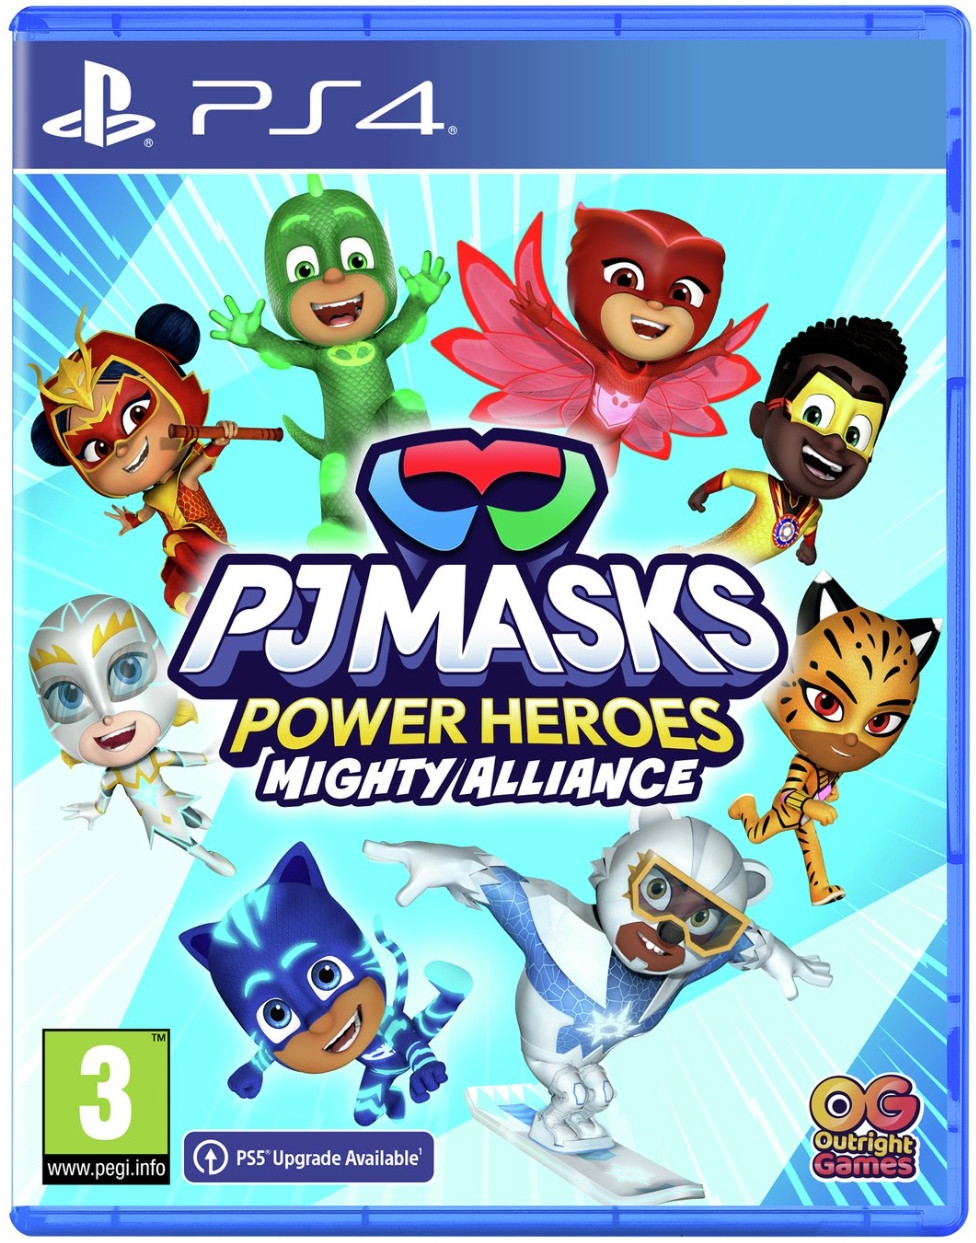 PJ Masks Power Heroes: Mighty Alliance (PS4), Outright Games